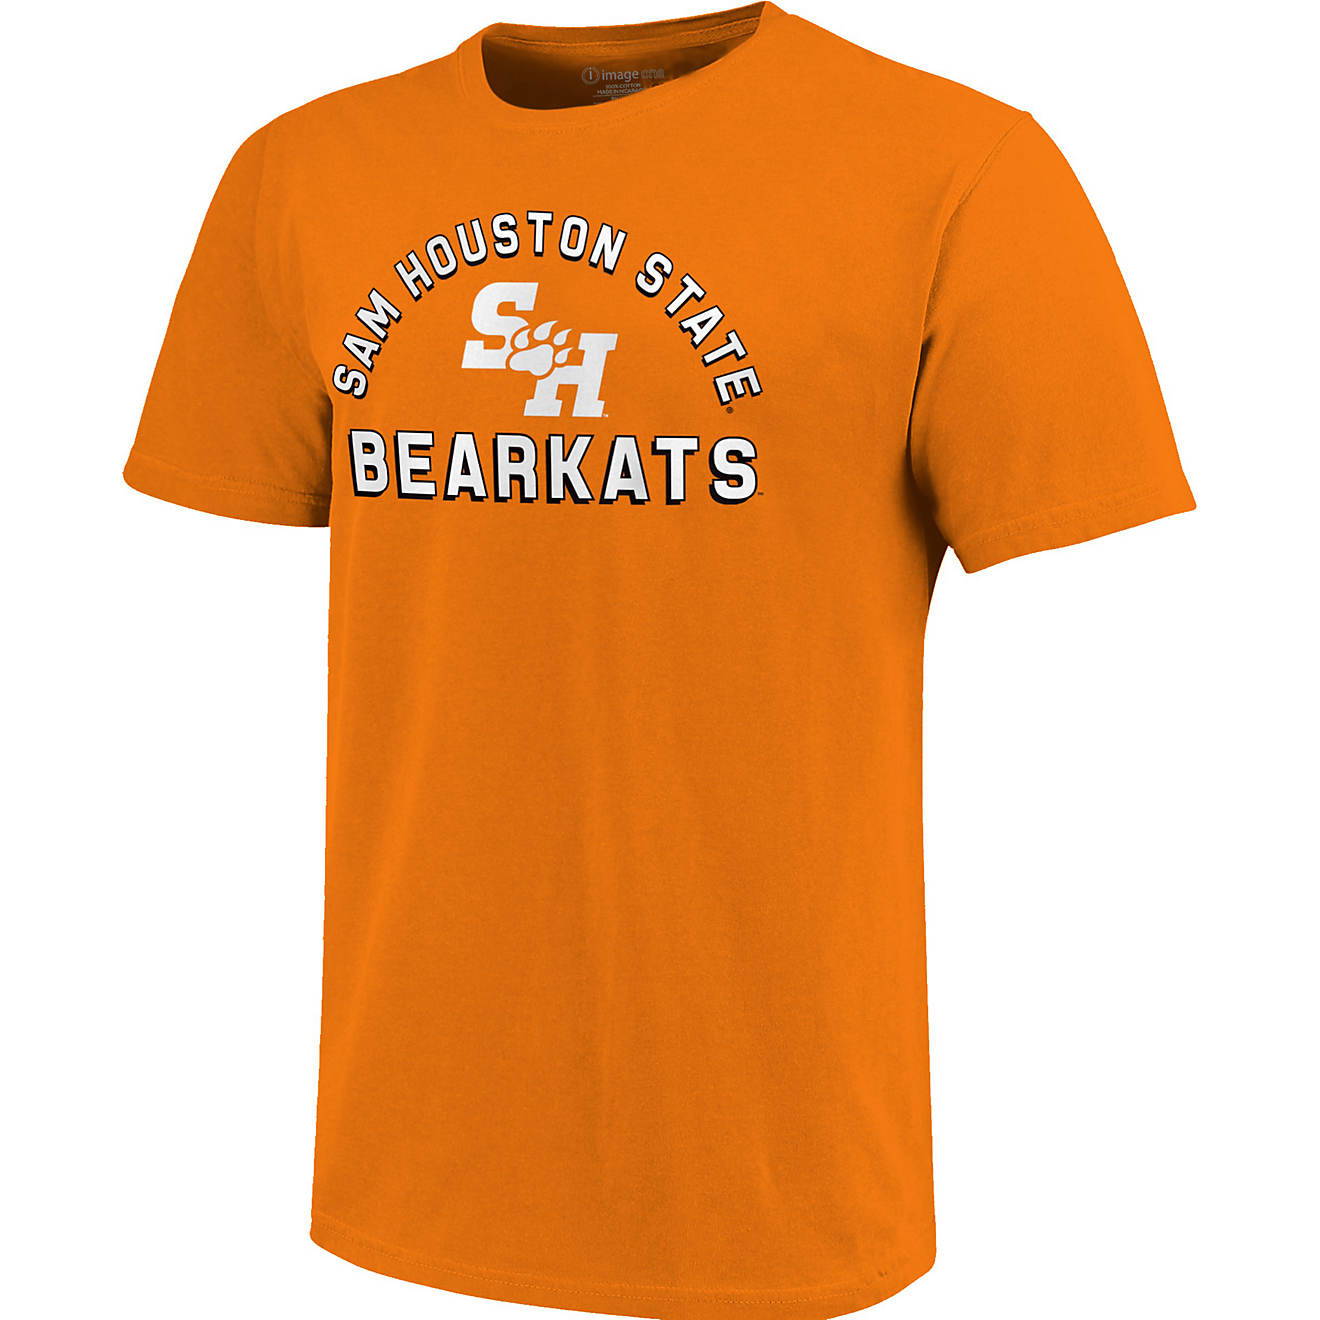 Sam Houston State University Official Unisex Adult T Shirt Collection